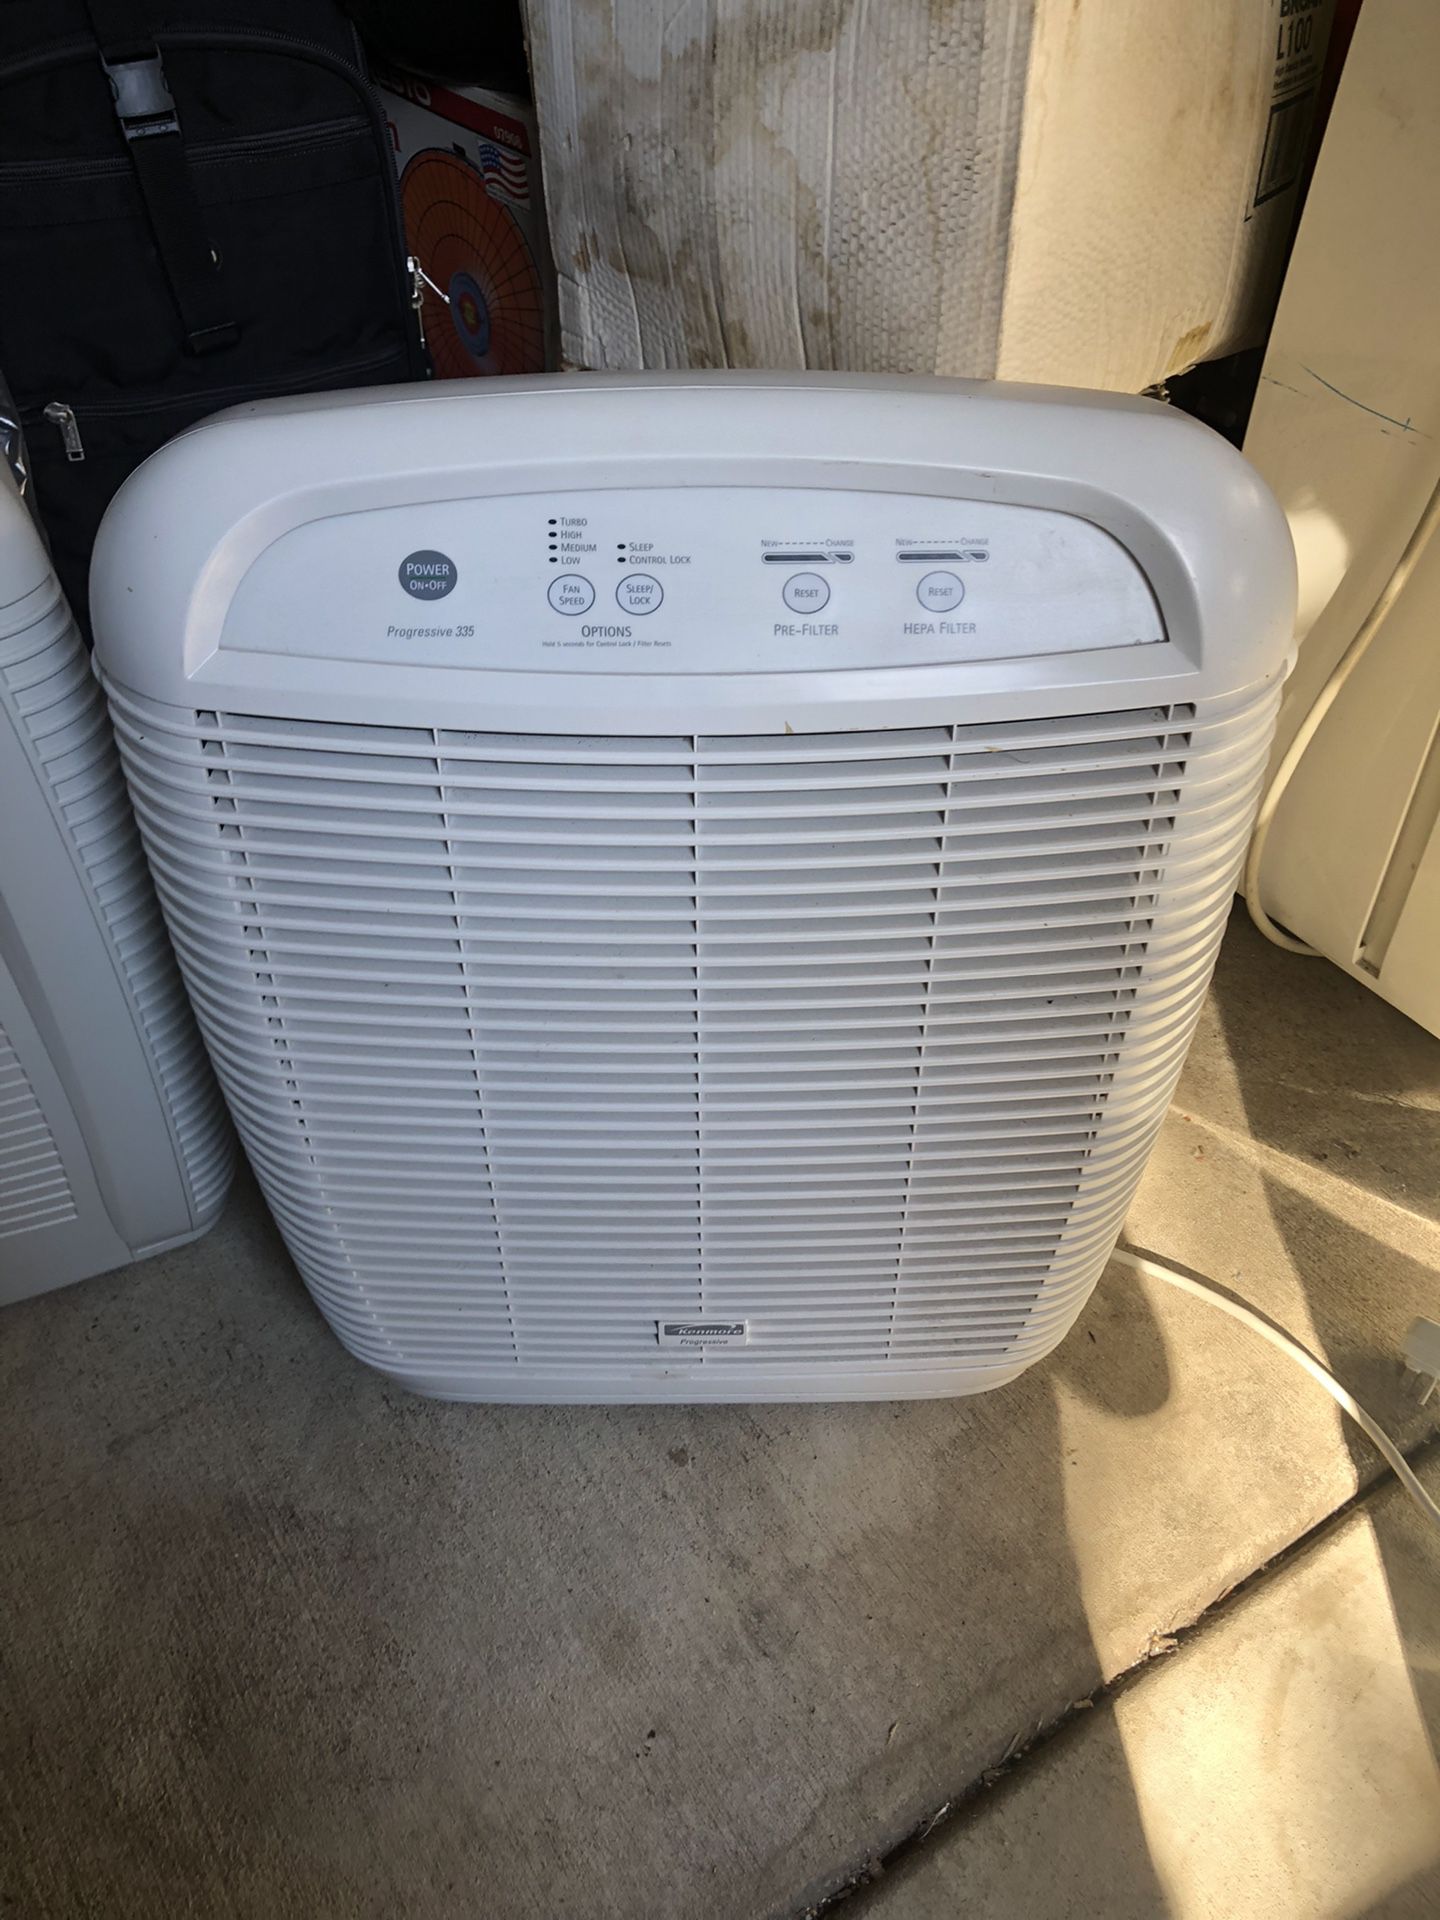 PRICE IS FIRM Kenmore Progressive 335 Hepa Air Cleaner Purifier Allergy Pet Smoke Dust Pollen LIKE NEW FILTERS LARGE ROOM